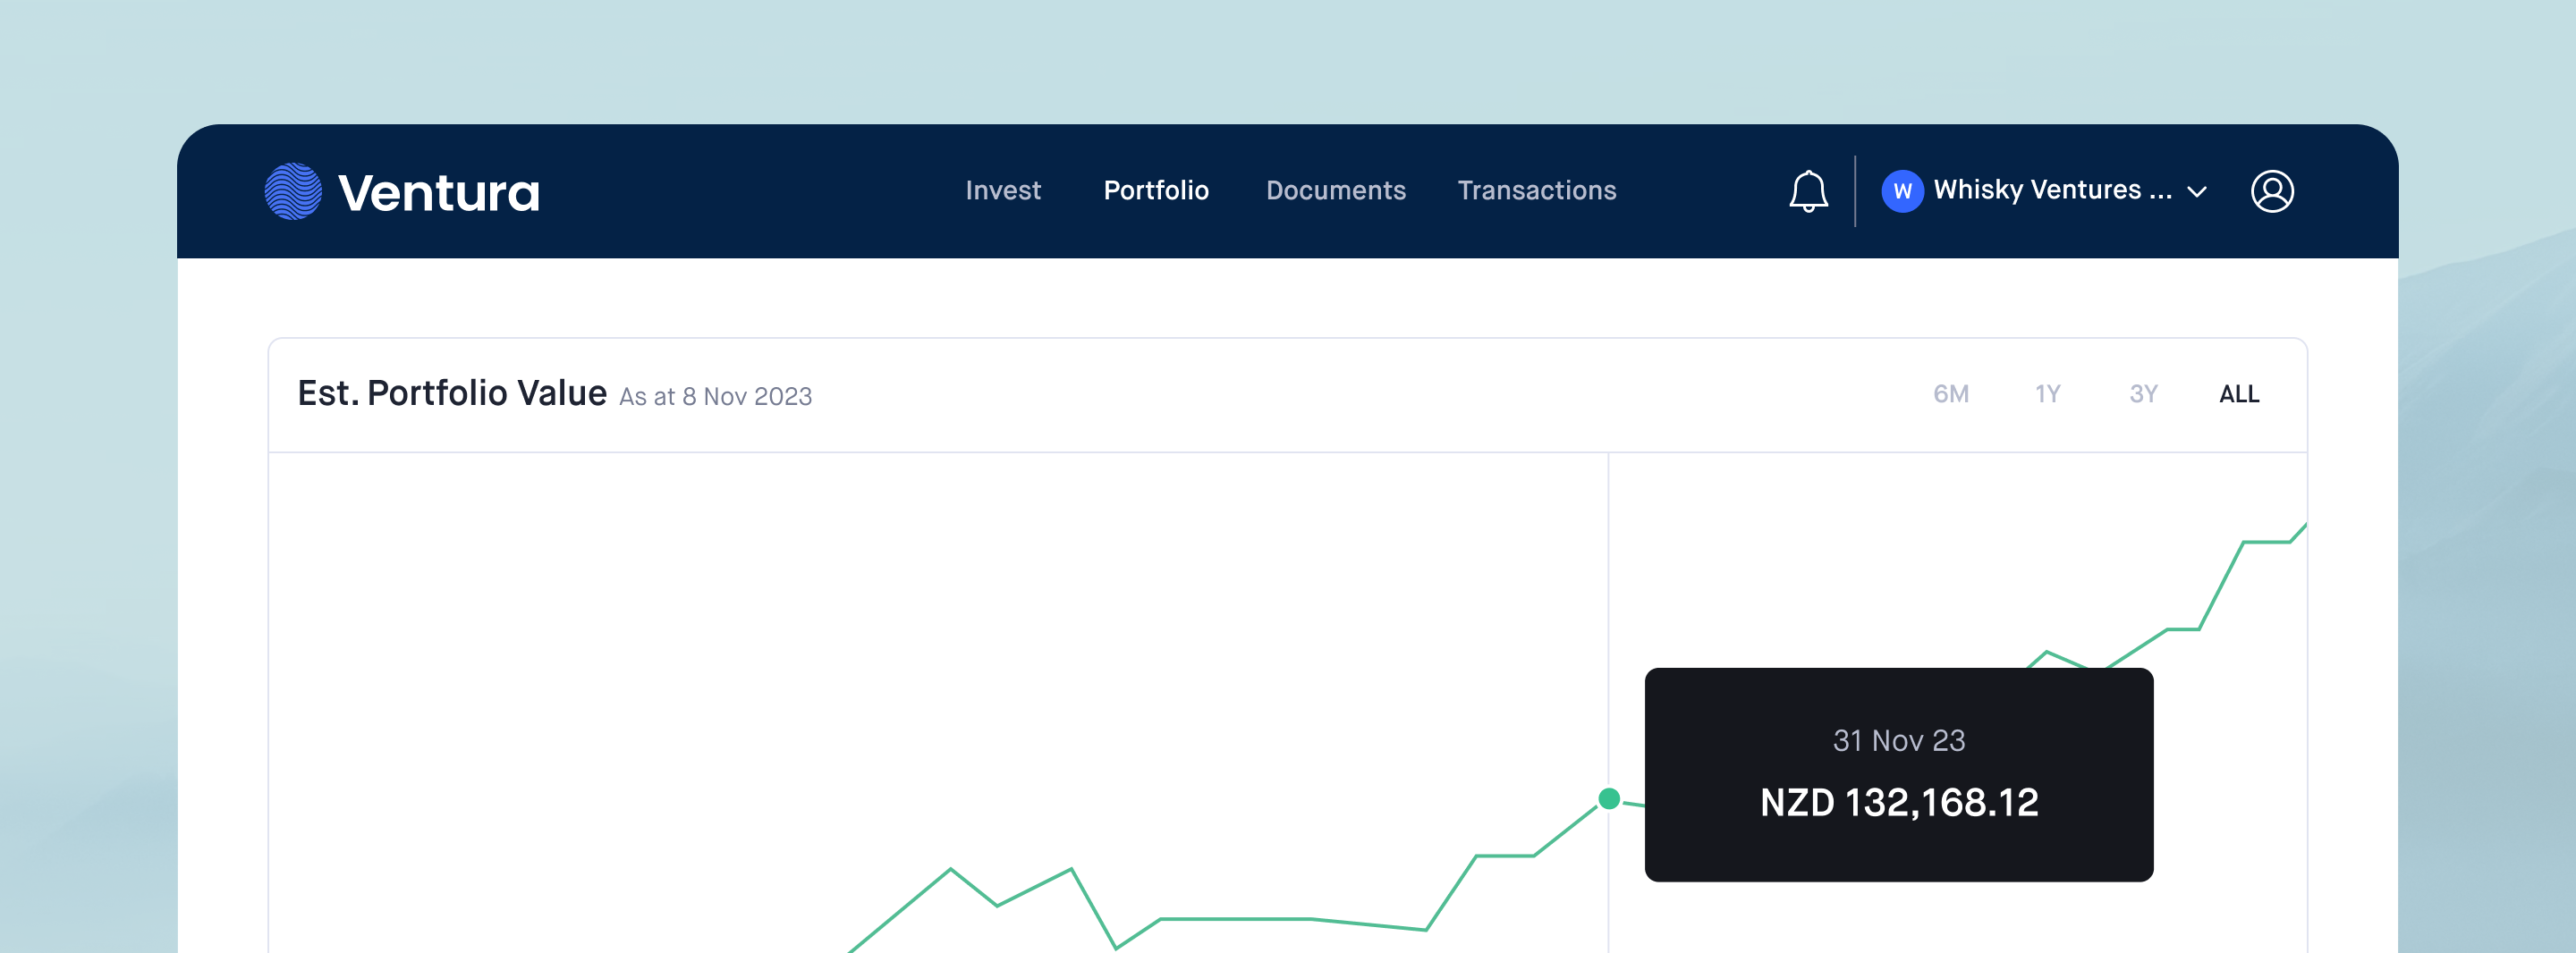 Improved Investor Reporting